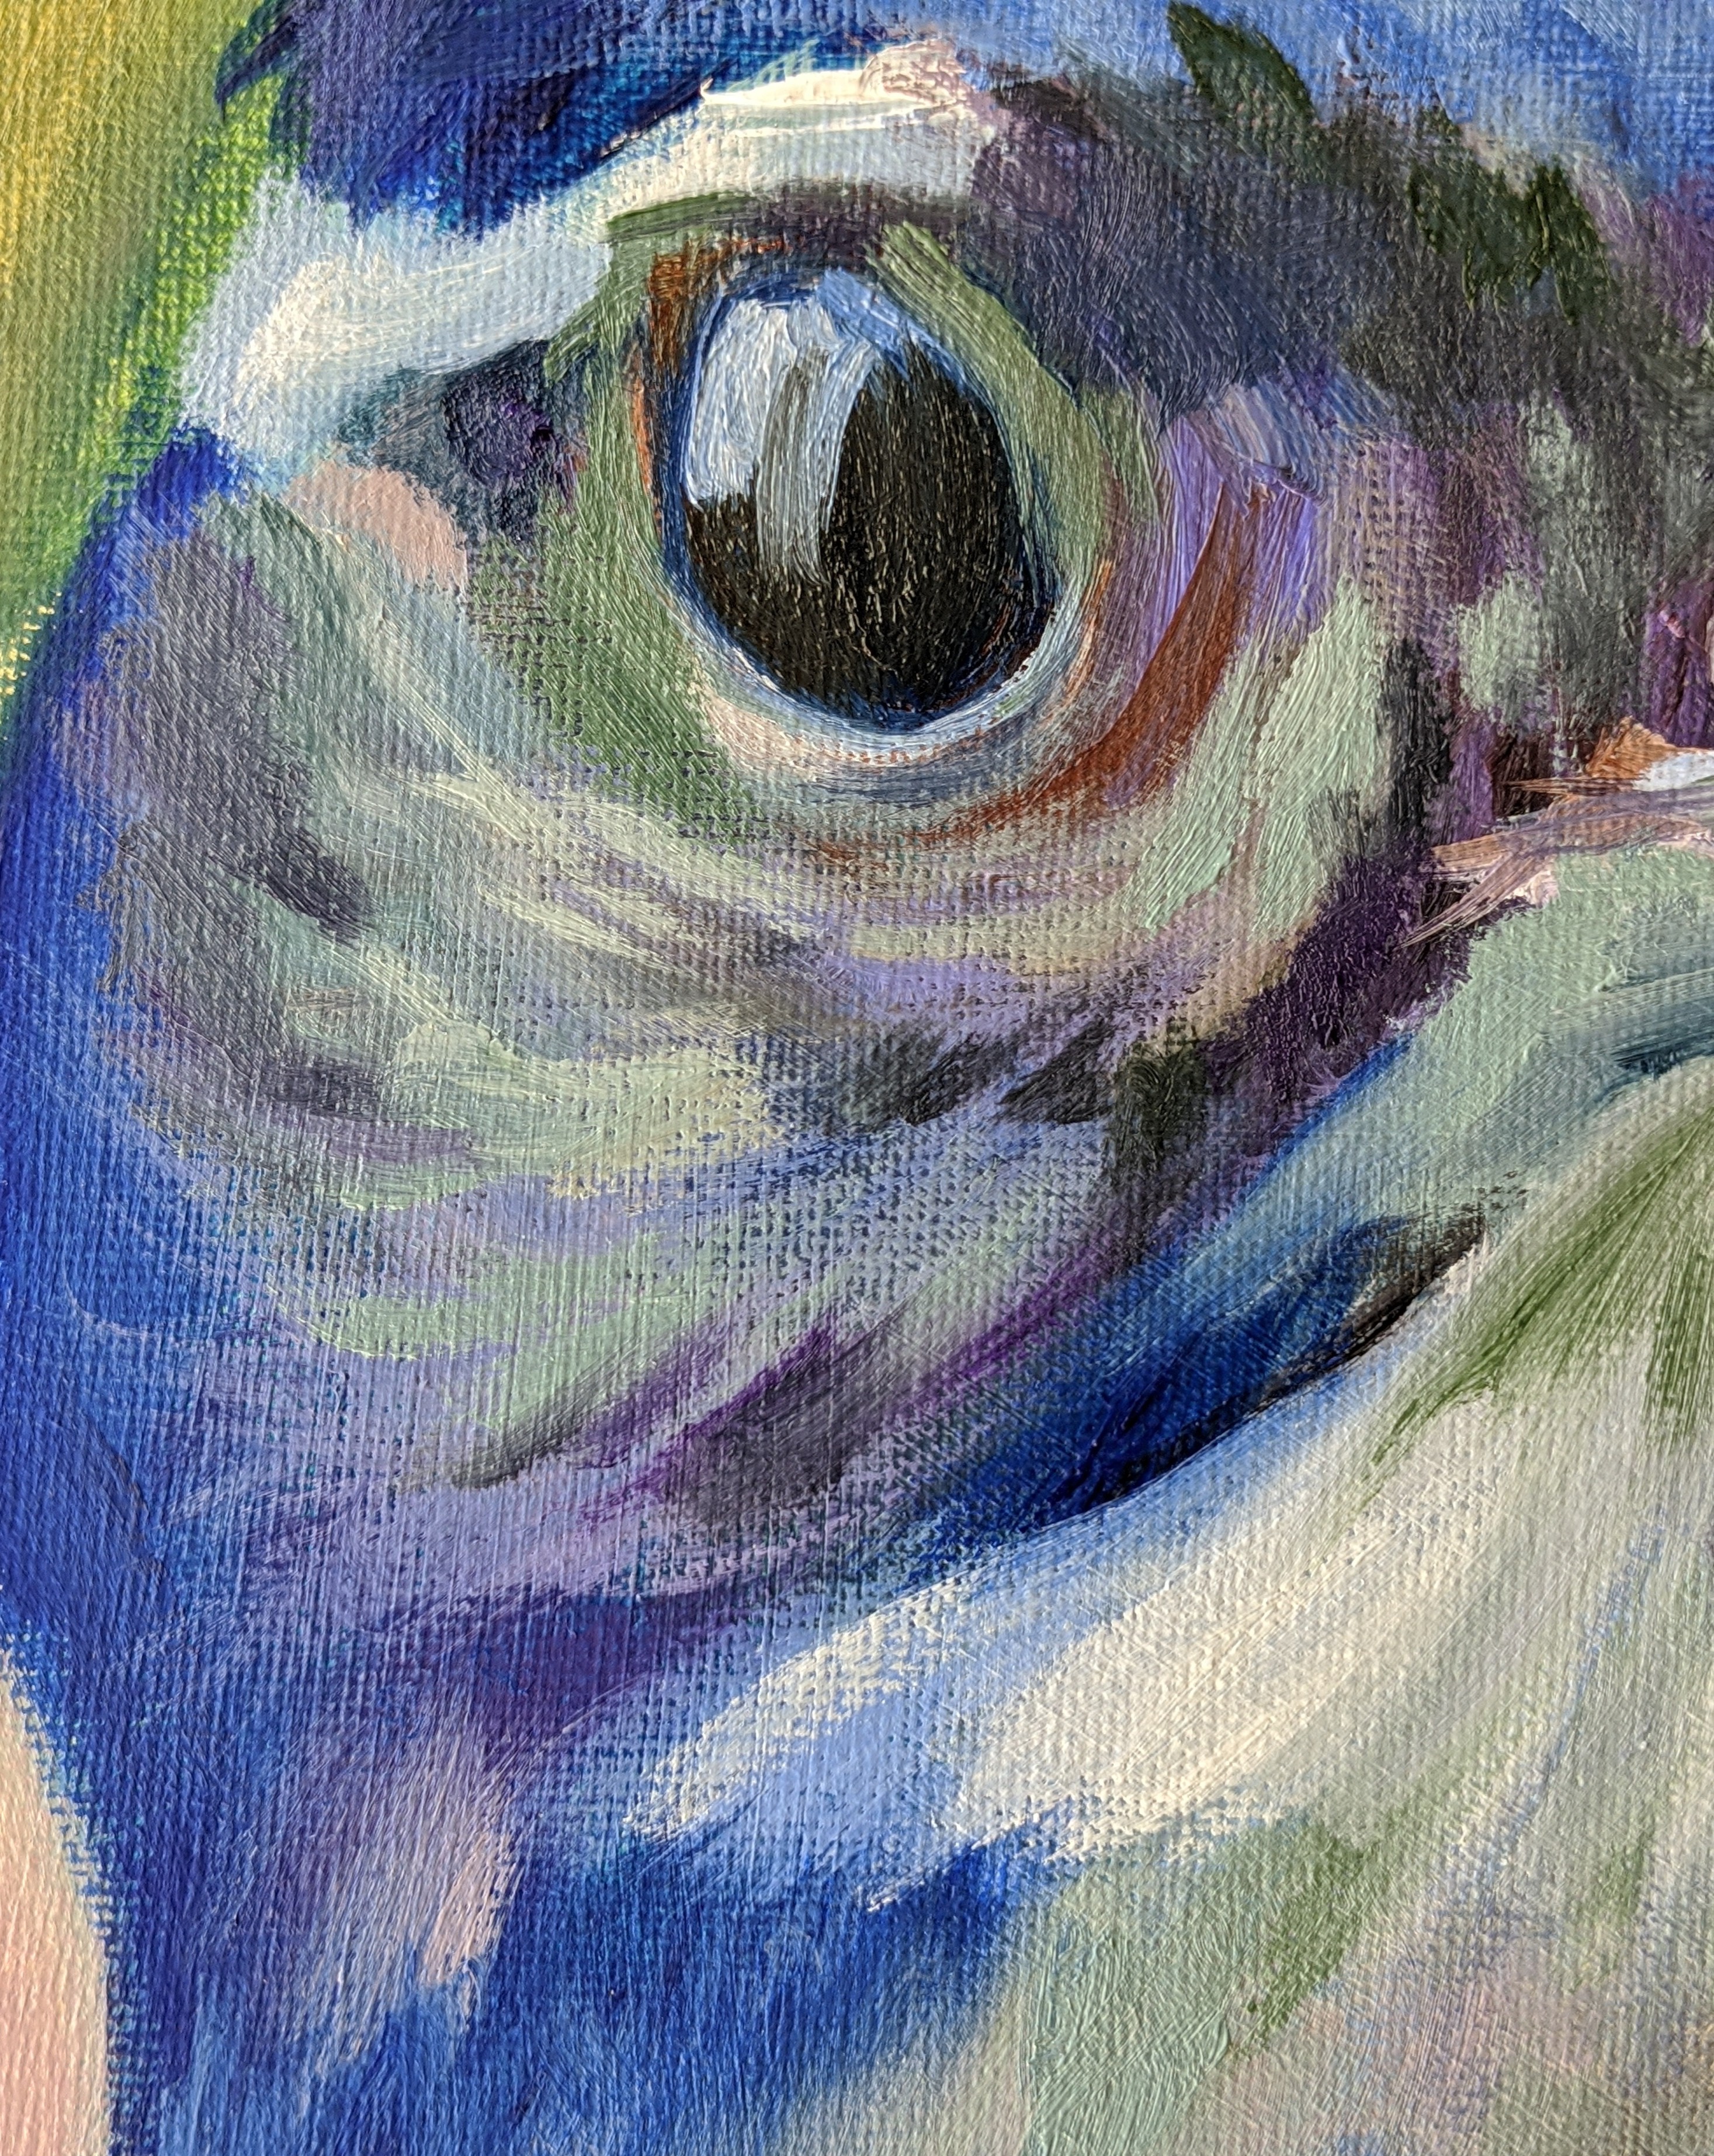 Just a close-up of a work-in-progress